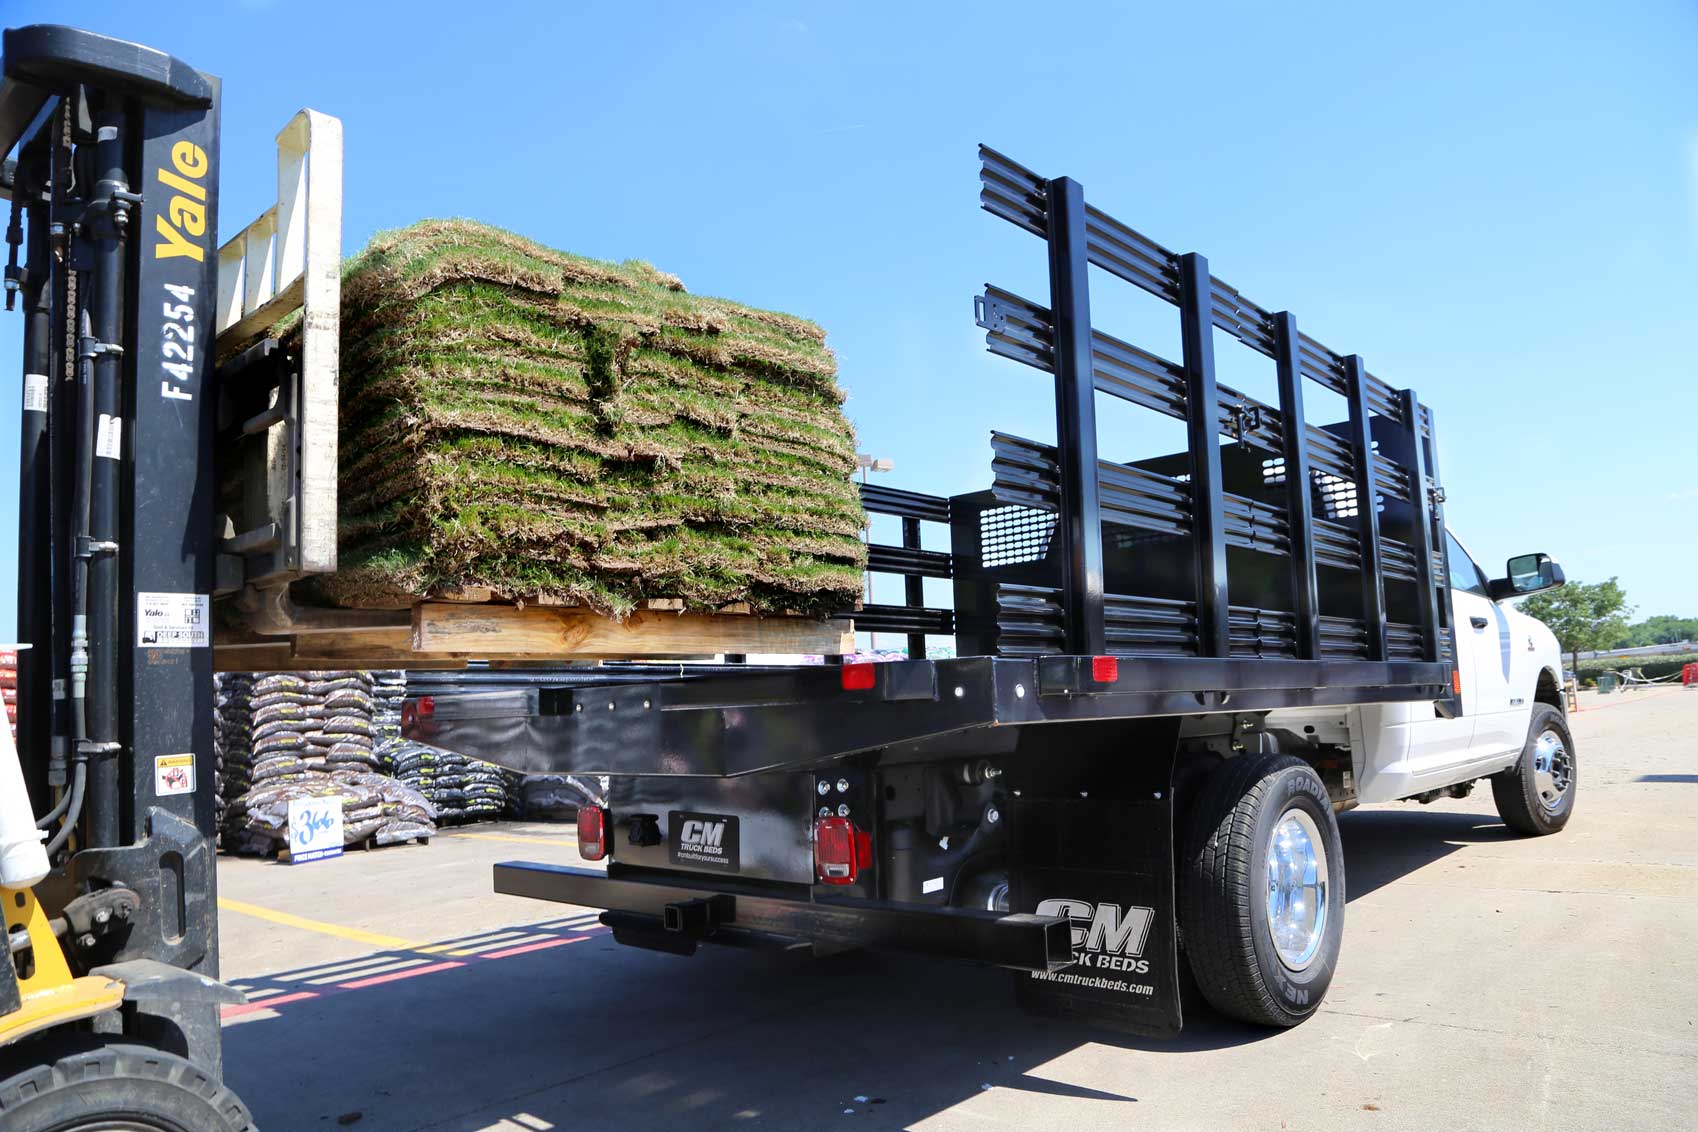 Platfrom truck bed with side stake option loading on grass